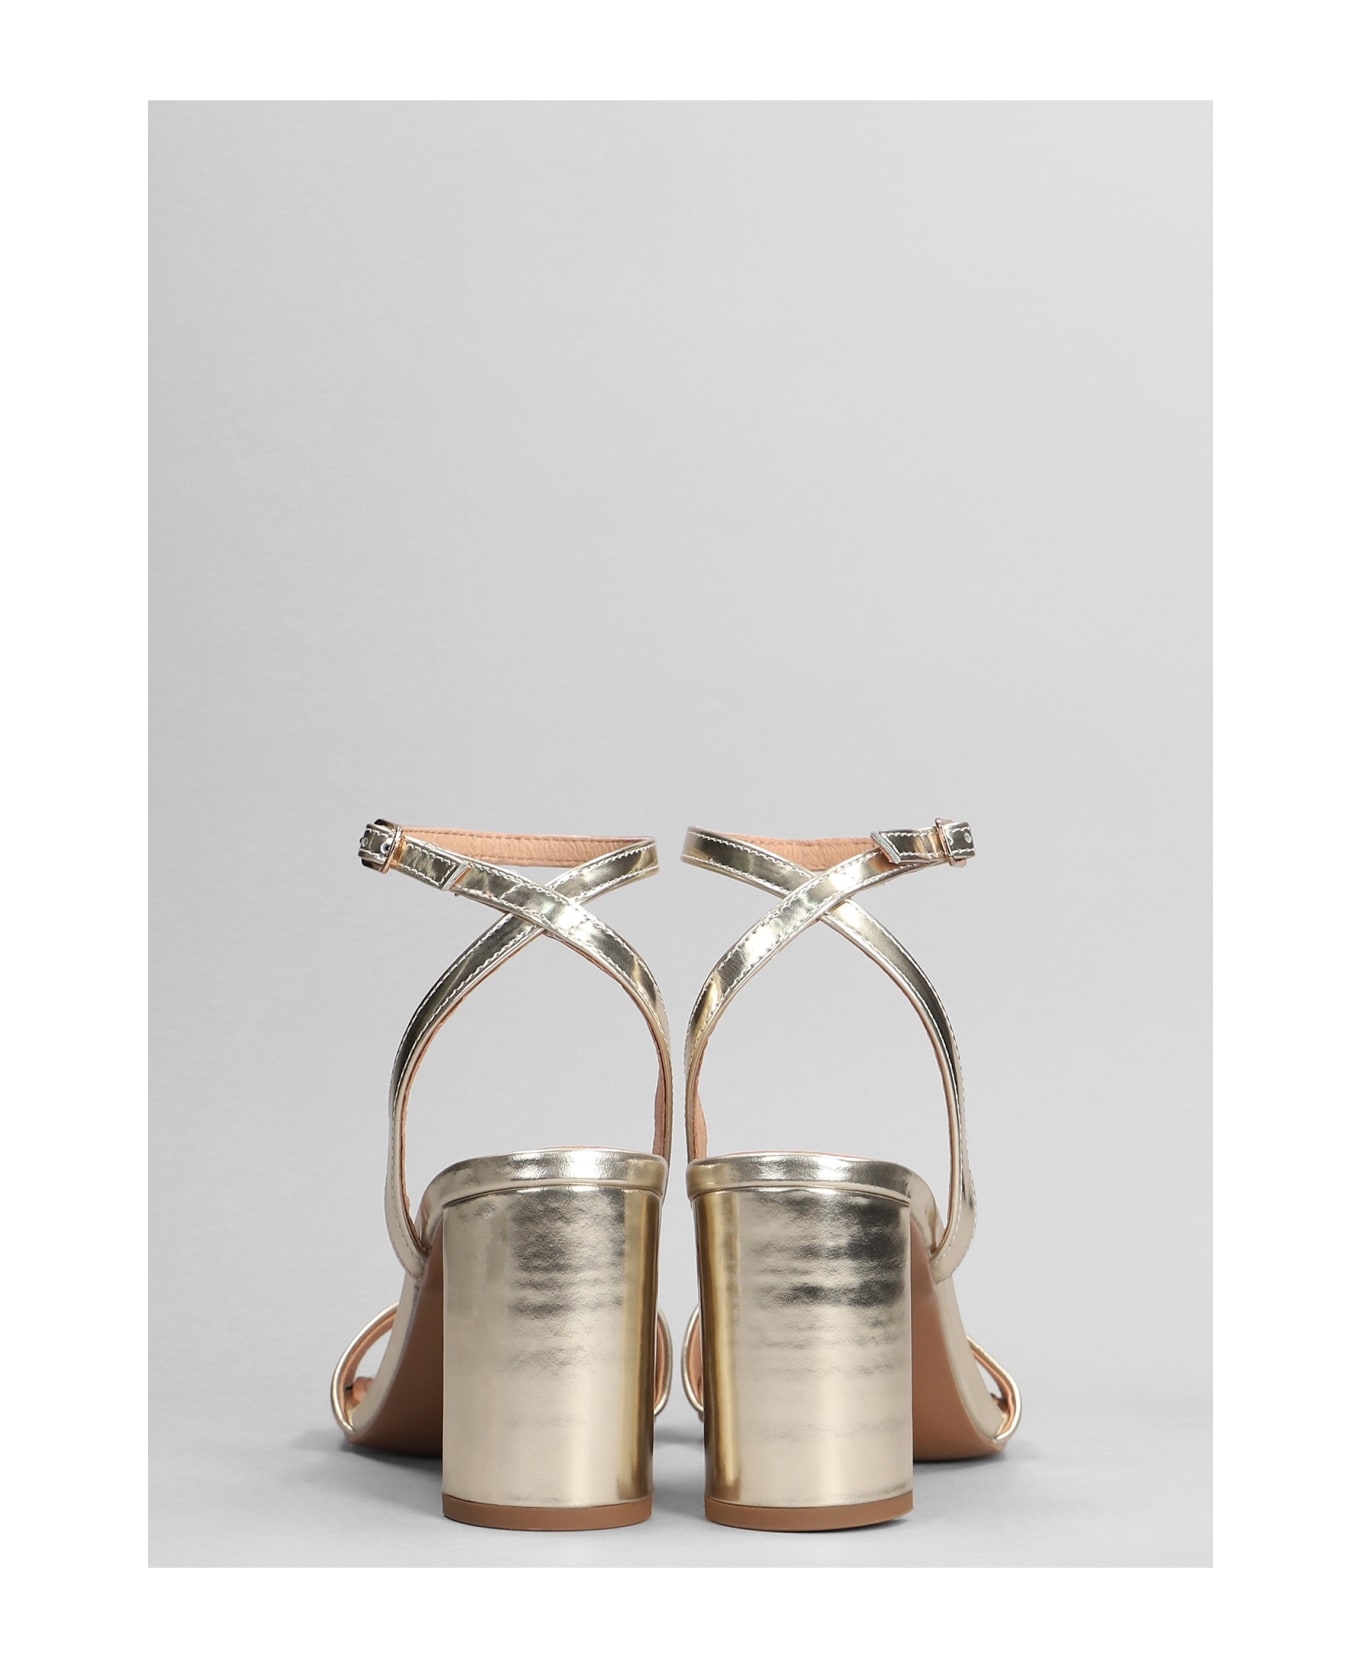 Bibi Lou Aster Sandals In Gold Leather - gold サンダル